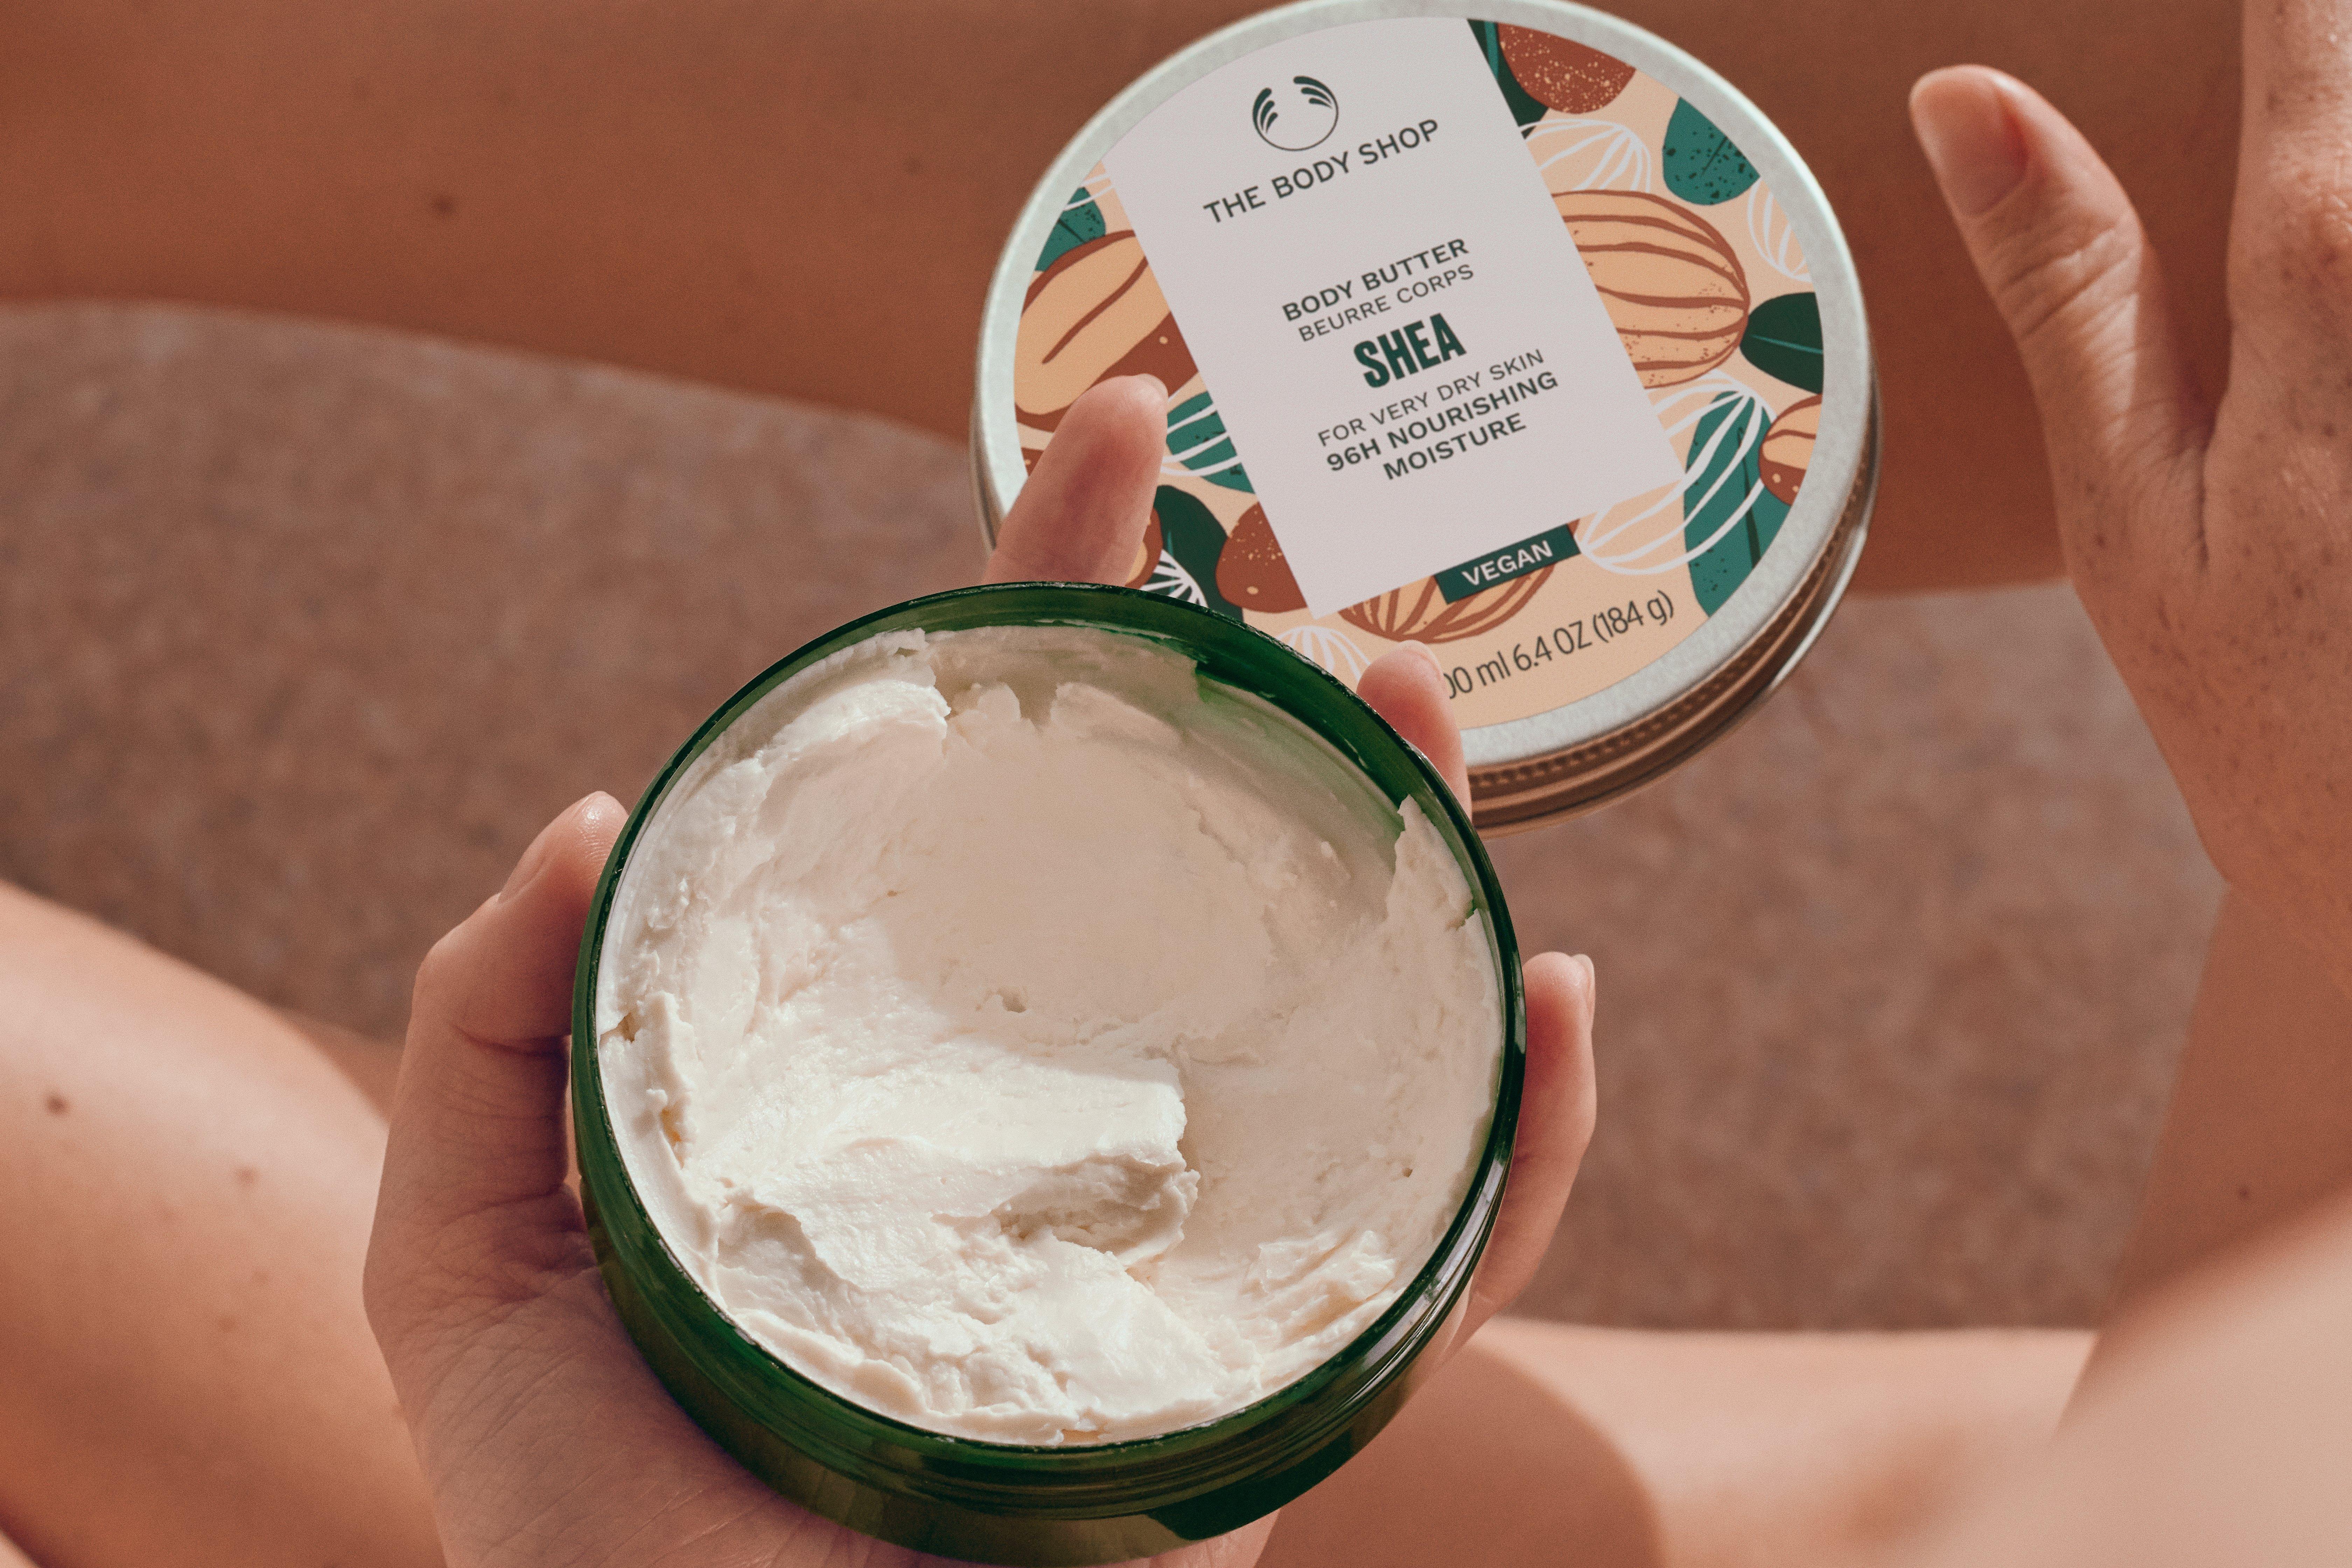 Woman scooping The Body Shop Hemp Body Butter from tub